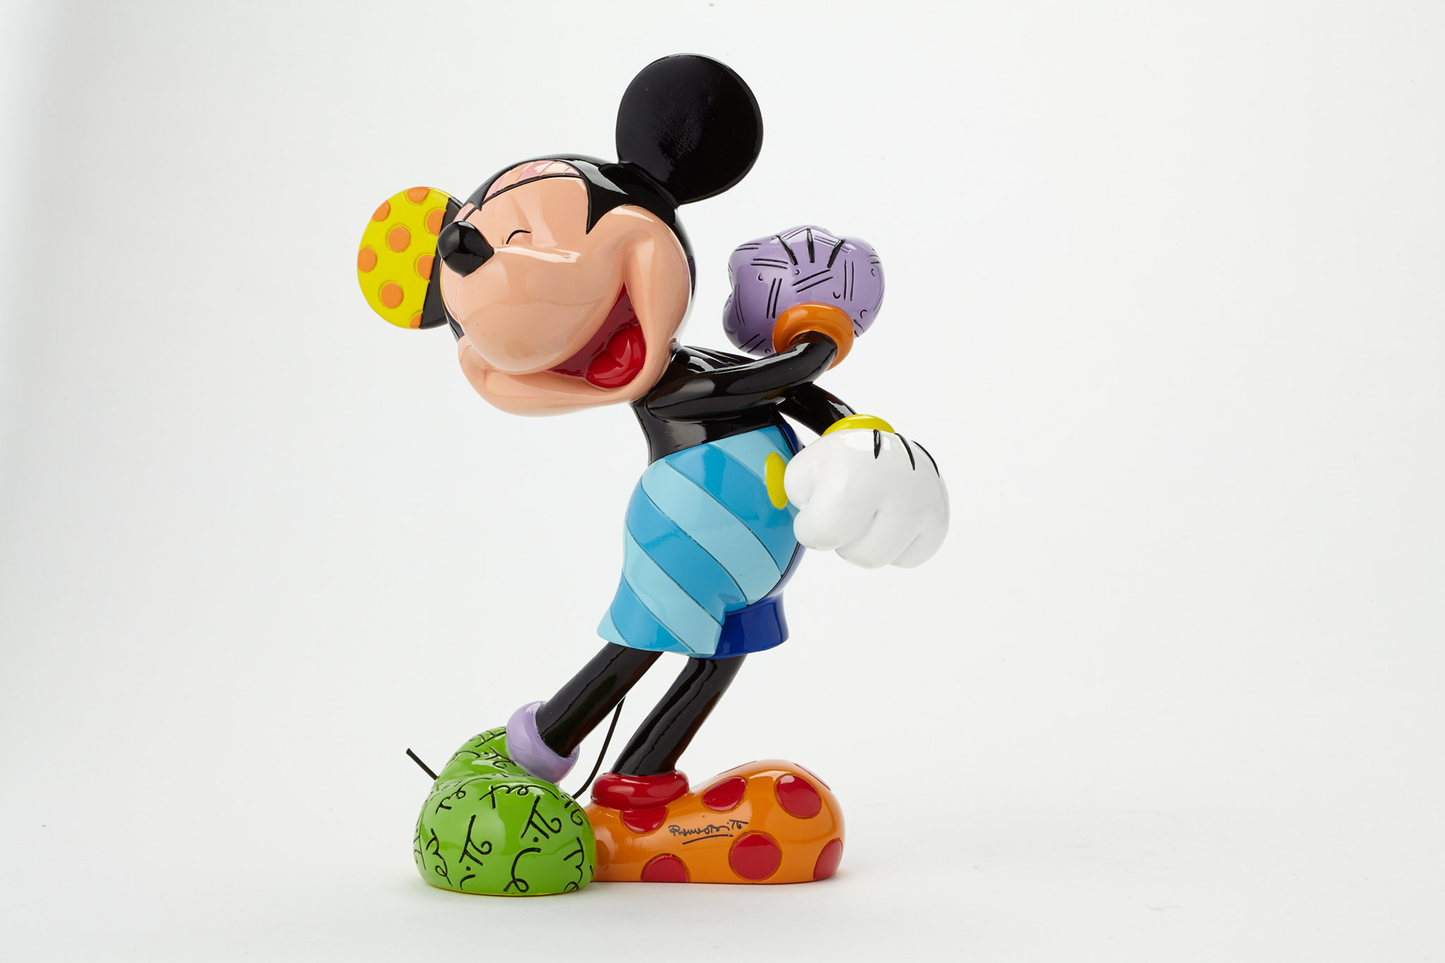 Laughing Mickey Mouse